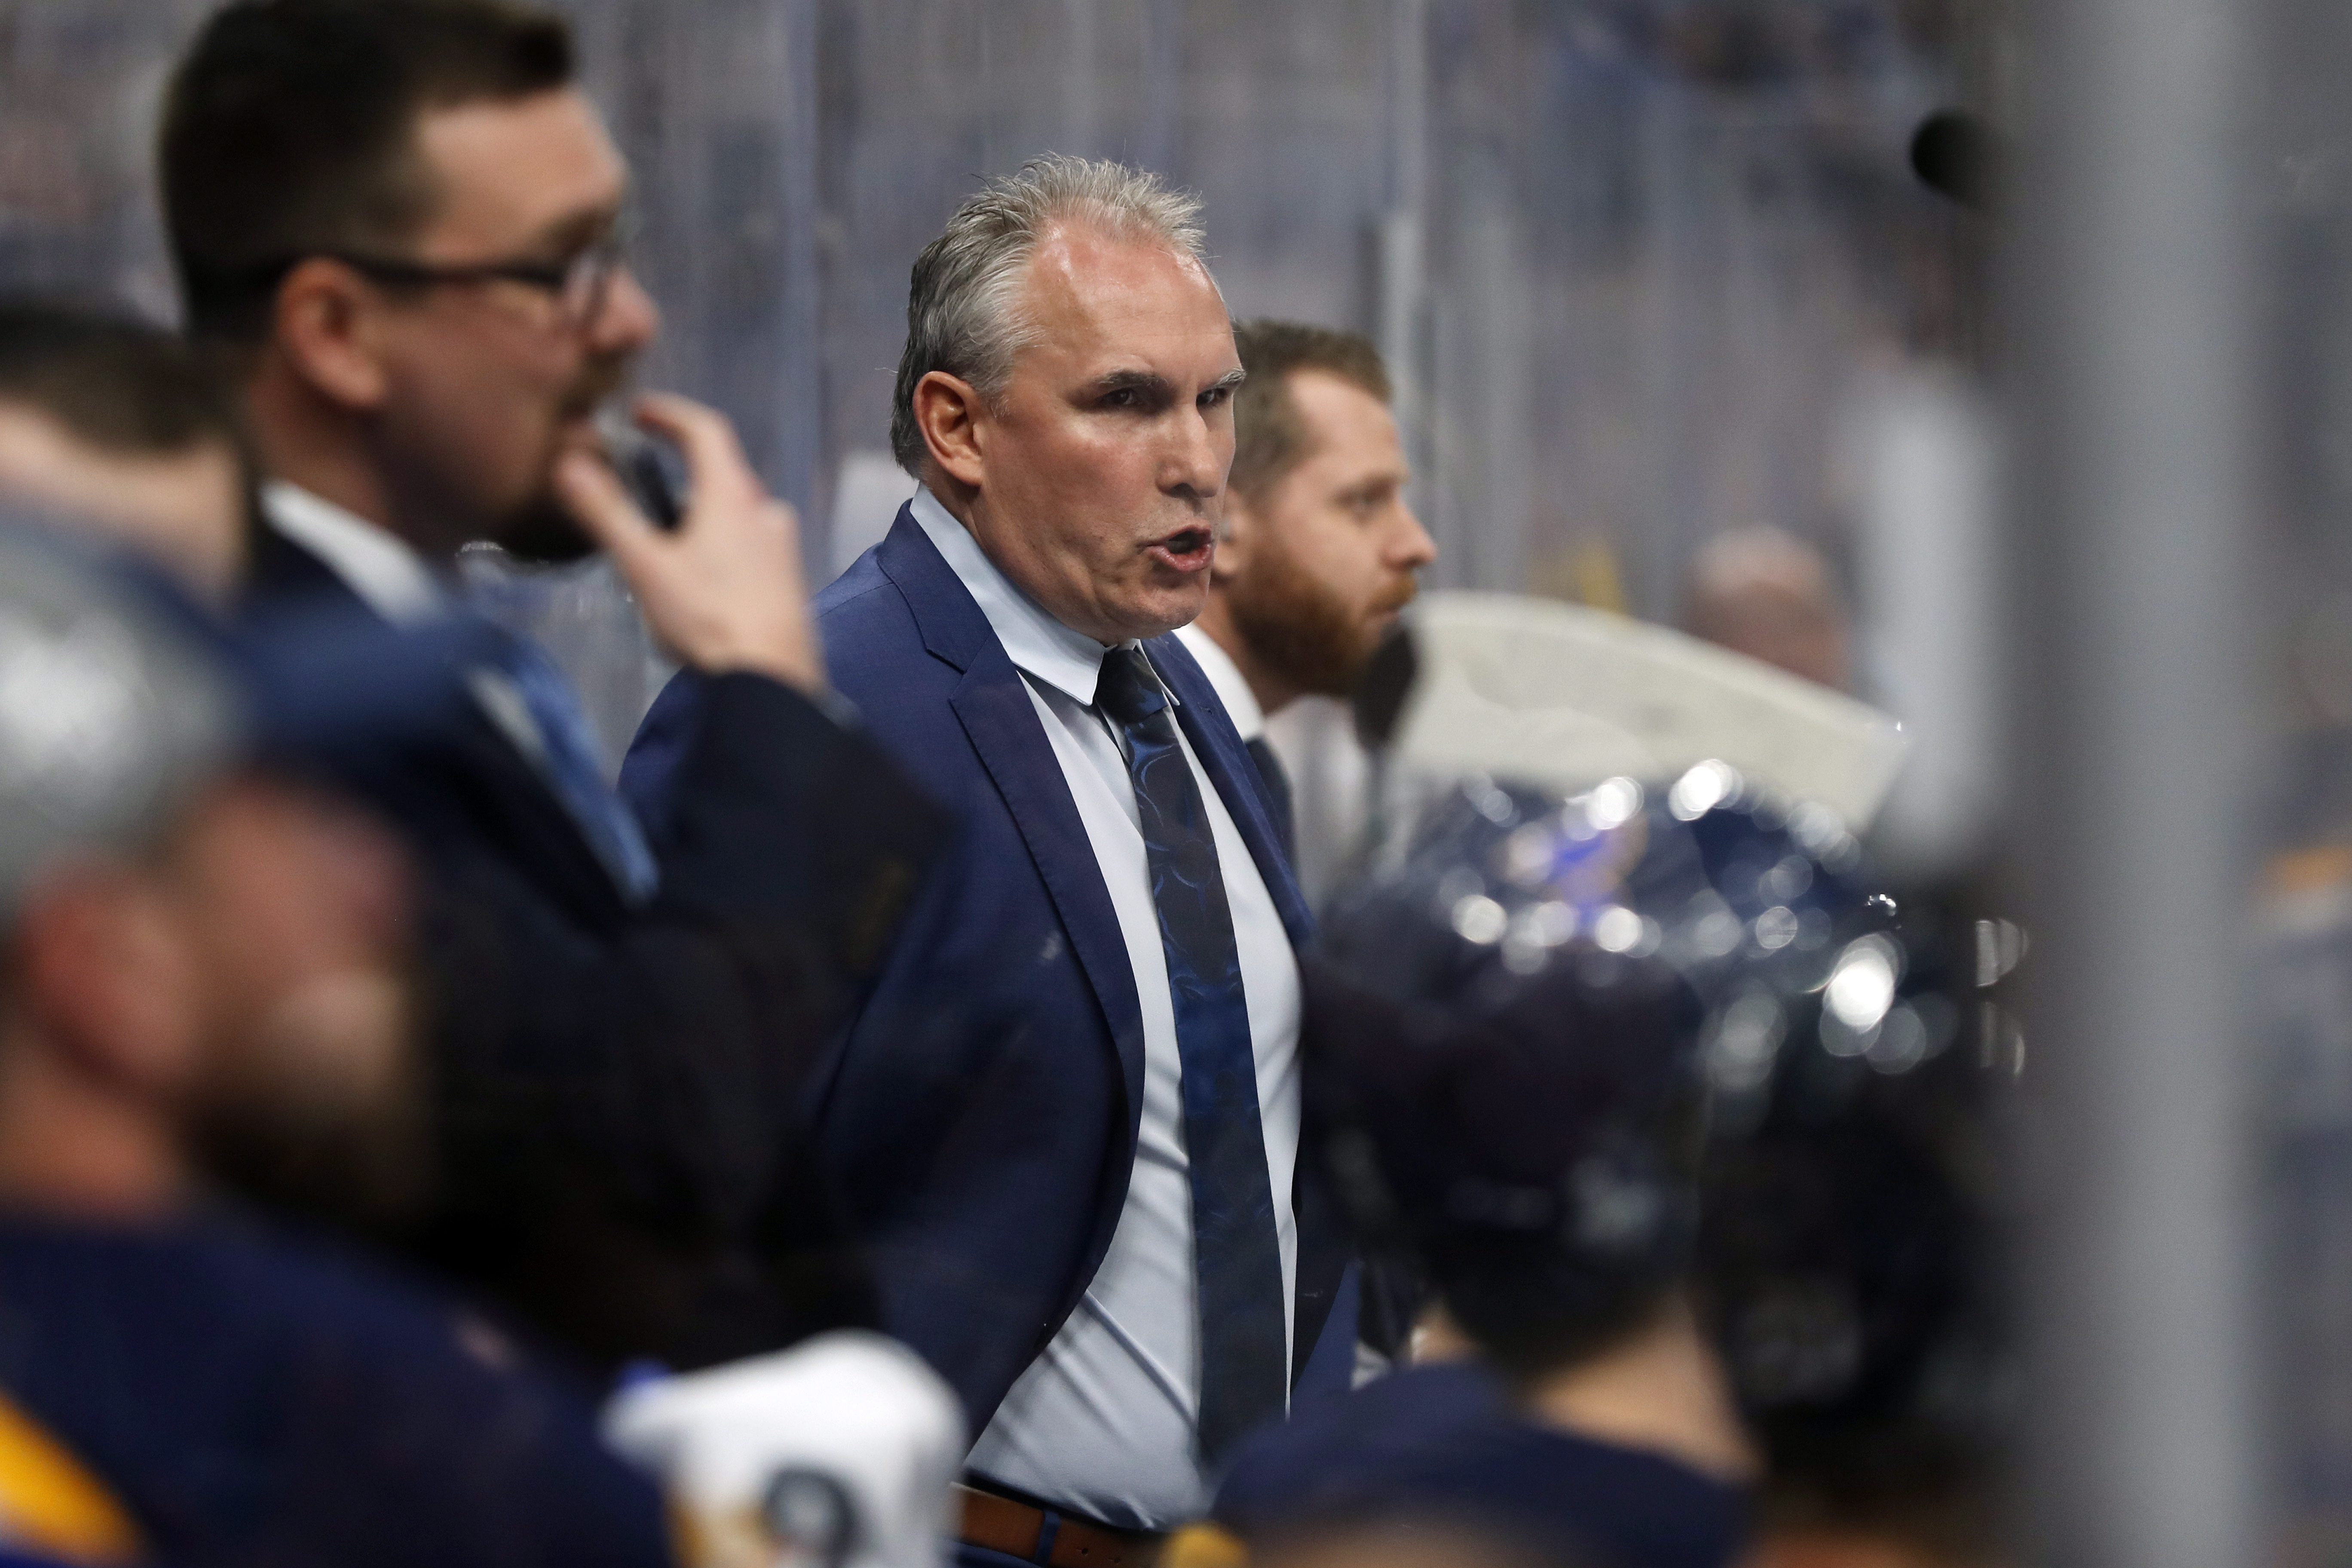 Leafs core among ‘attractions’ to coach in Toronto, Craig Berube says